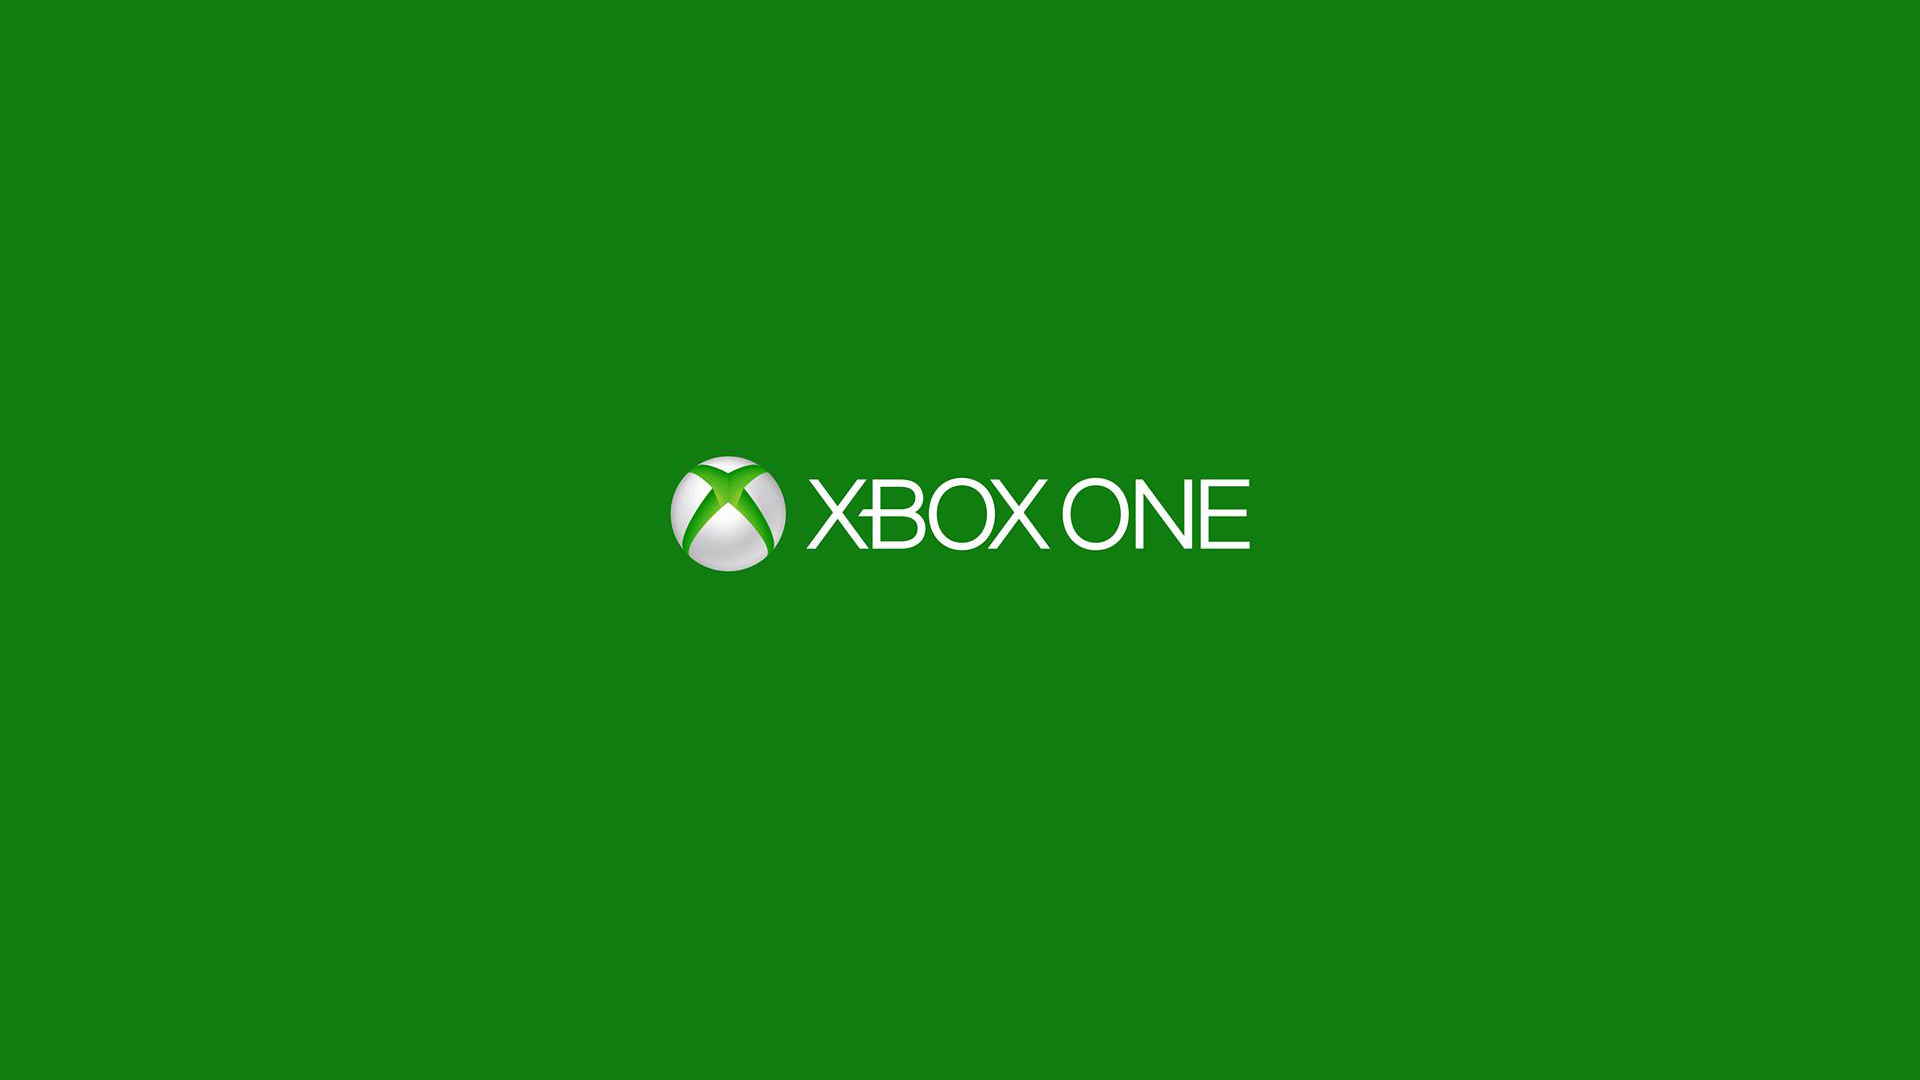 Xbox one desktop wallpaper wallpapers and images   wallpapers 1920x1080